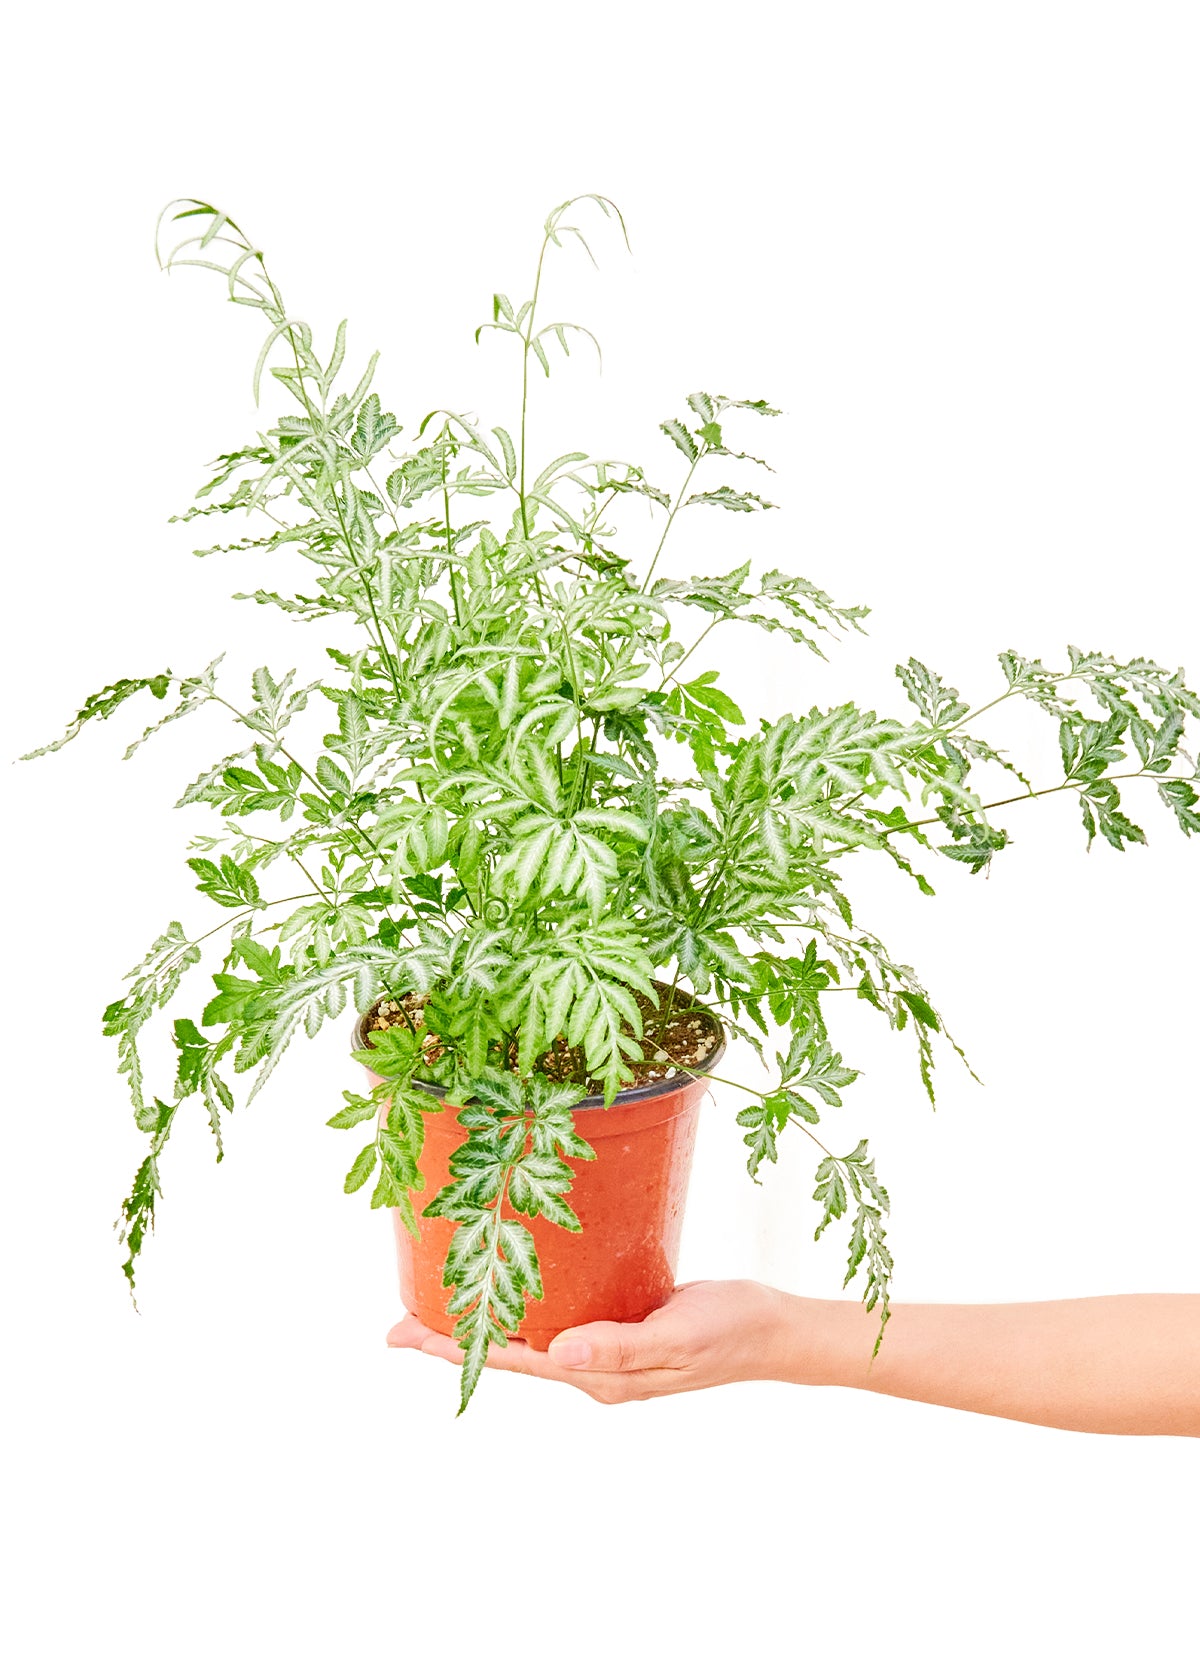 Medium size Silver Lace Fern Plant in a growers pot with a white background with a hand holding the bottom of the pot to show the top view